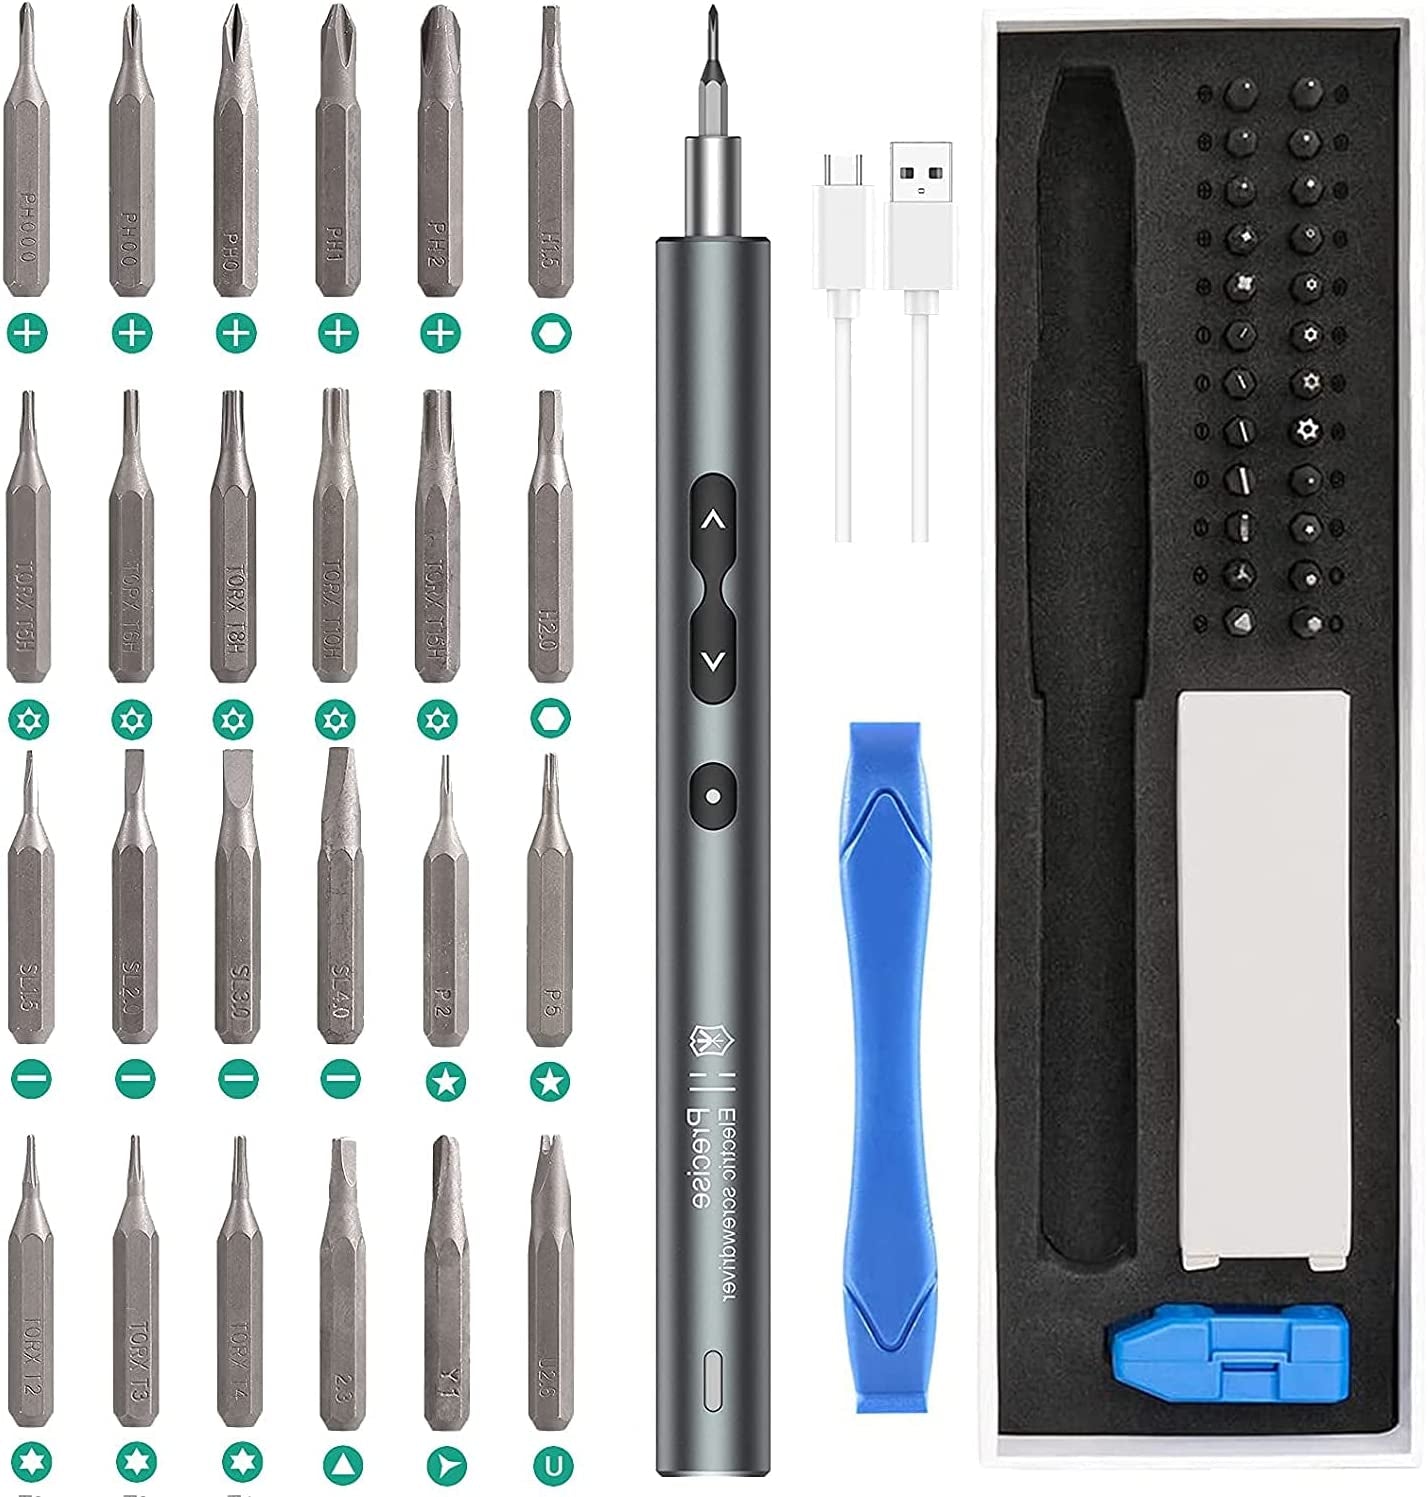 secretgreen.com.au, Electric Screwdriver, 28 in 1 Precision Screwdriver Set with 24 Bits and USB Cable, Portable Magnetic Repair Tool Kit with LED Lights for Phones Watch Jewelers Computers